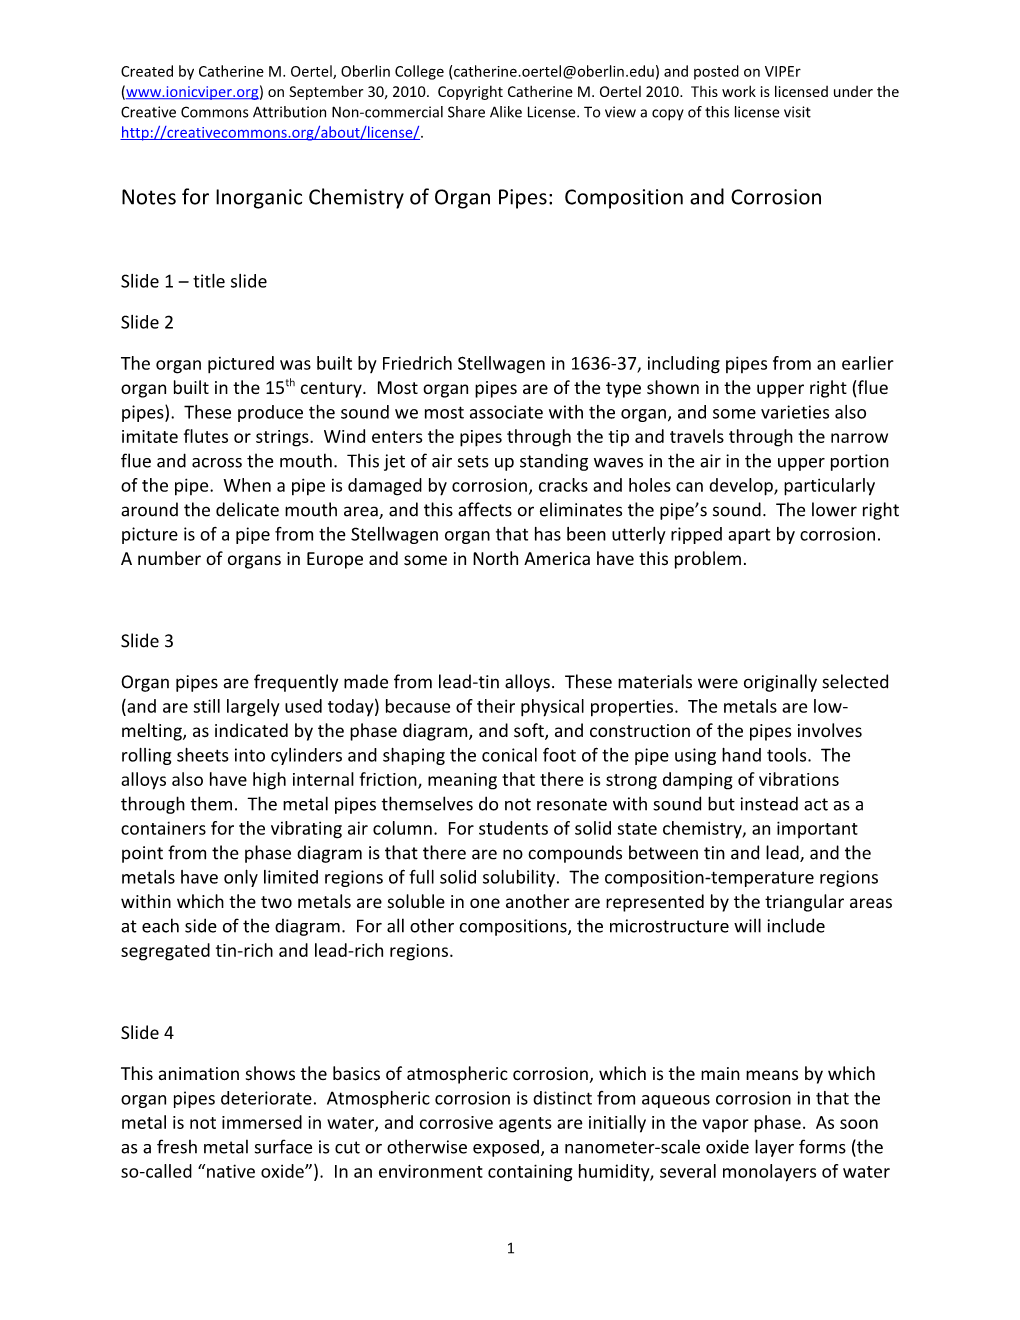 Notes for Inorganic Chemistry of Organ Pipes: Composition and Corrosion